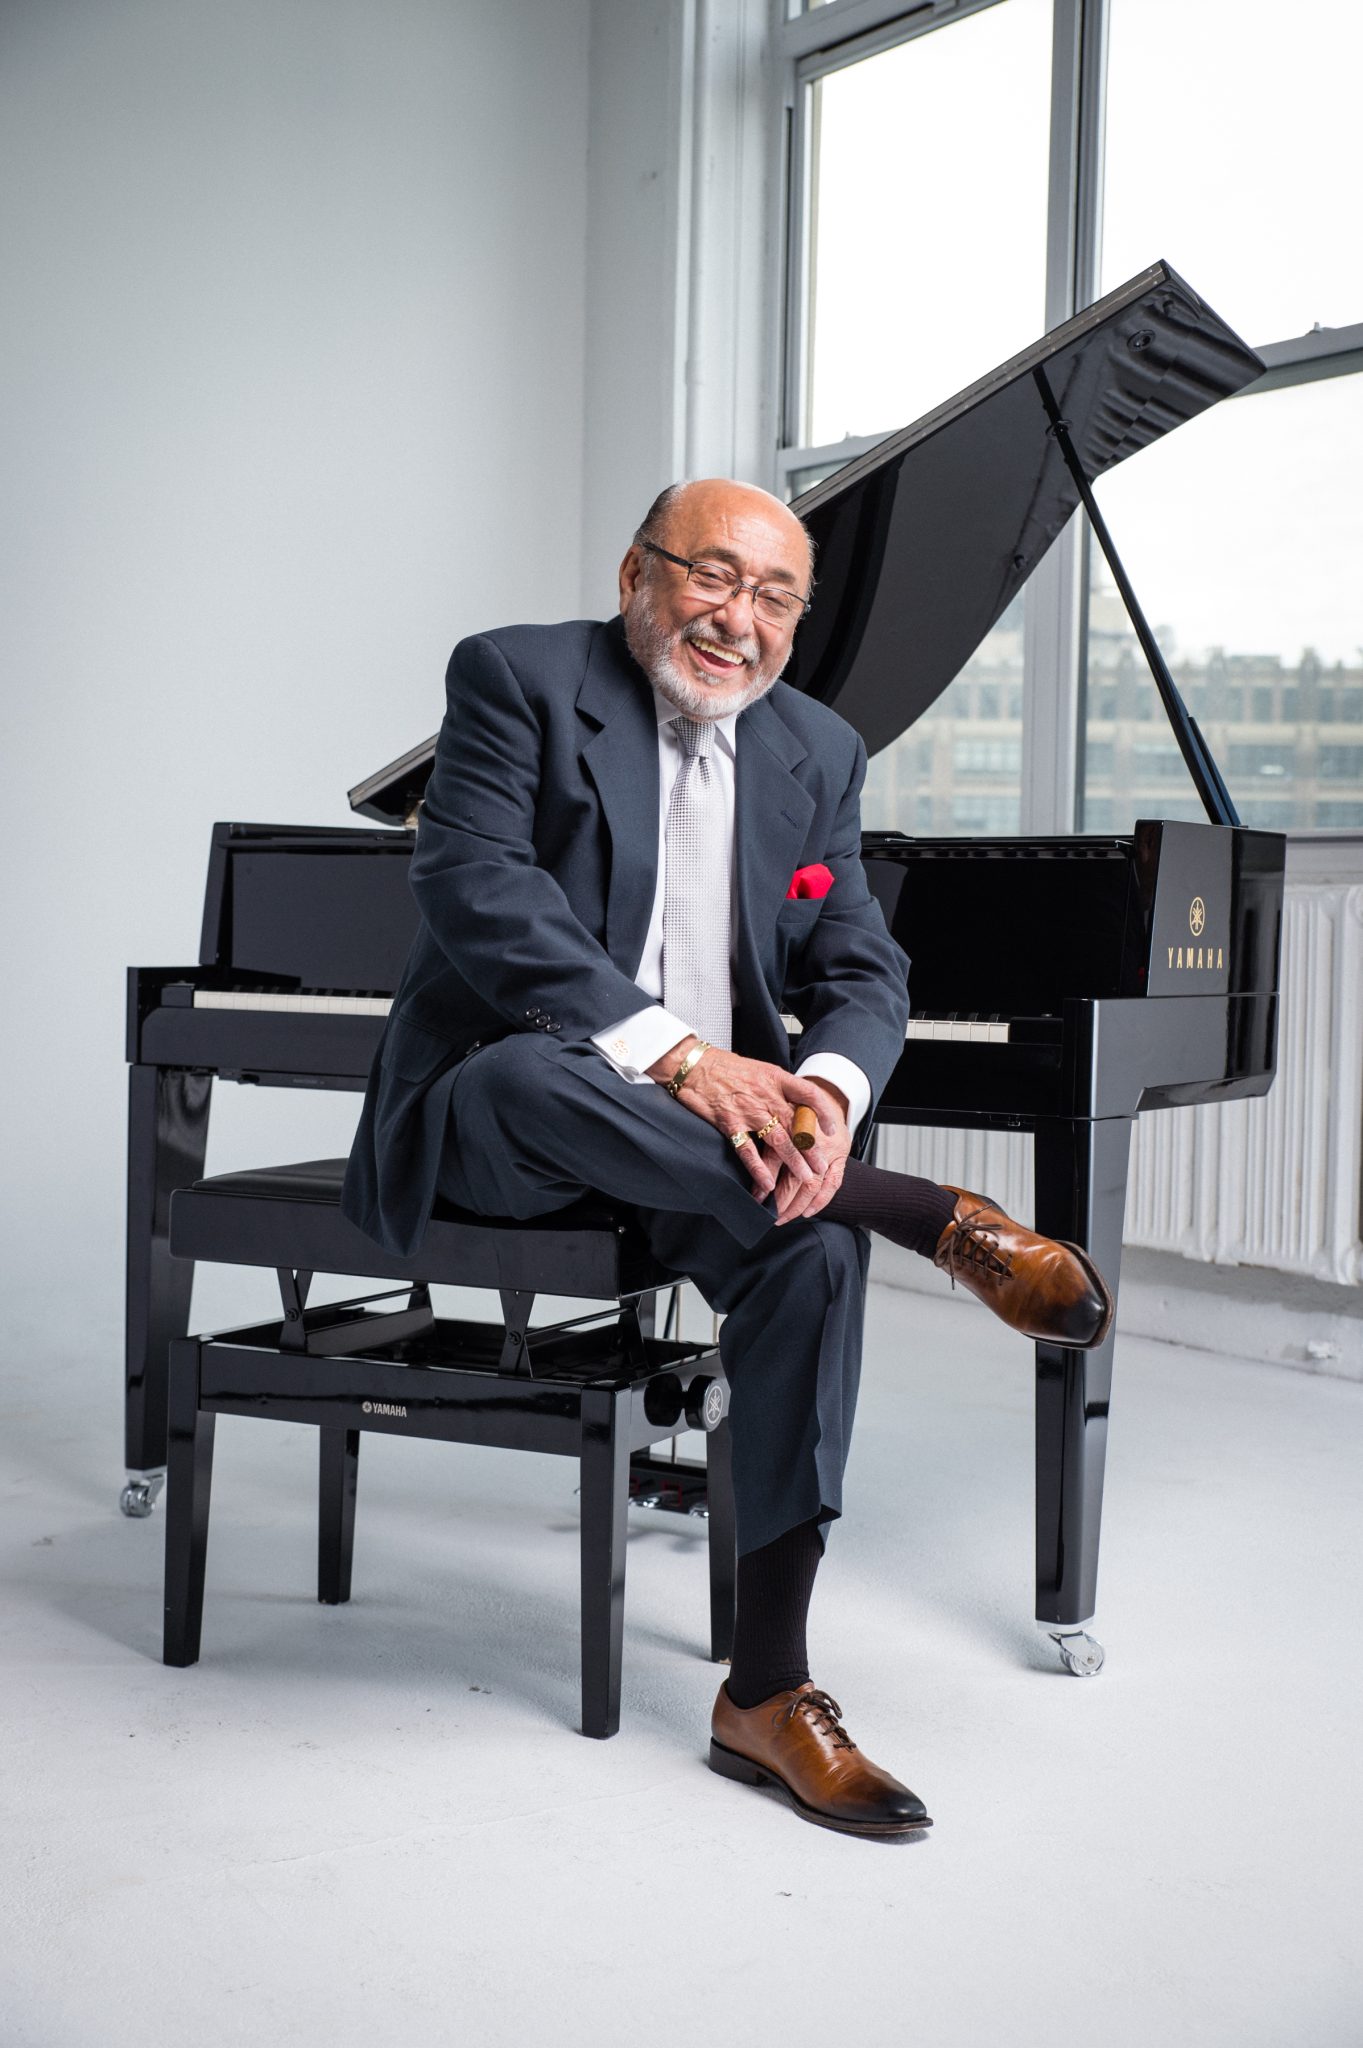 A cheerful man wearing a suit and a red pocket square sits laughing beside a grand piano in a room with a view.